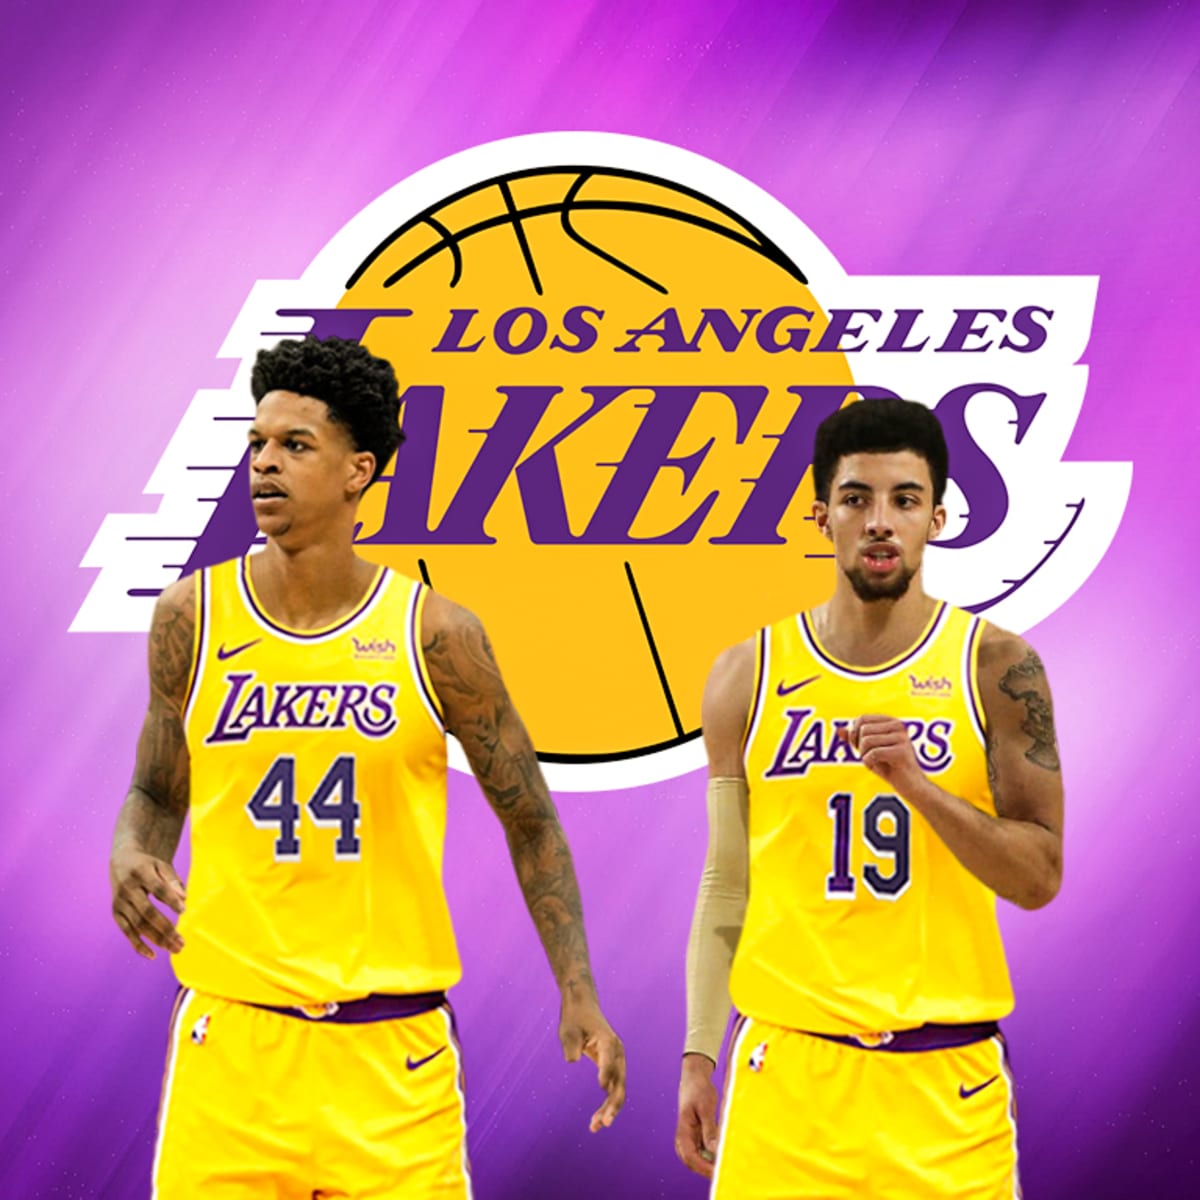 Los Angeles Lakers - OFFICIAL: Scotty Pippen Jr. is joining the #LakeShow  on a two-way contract